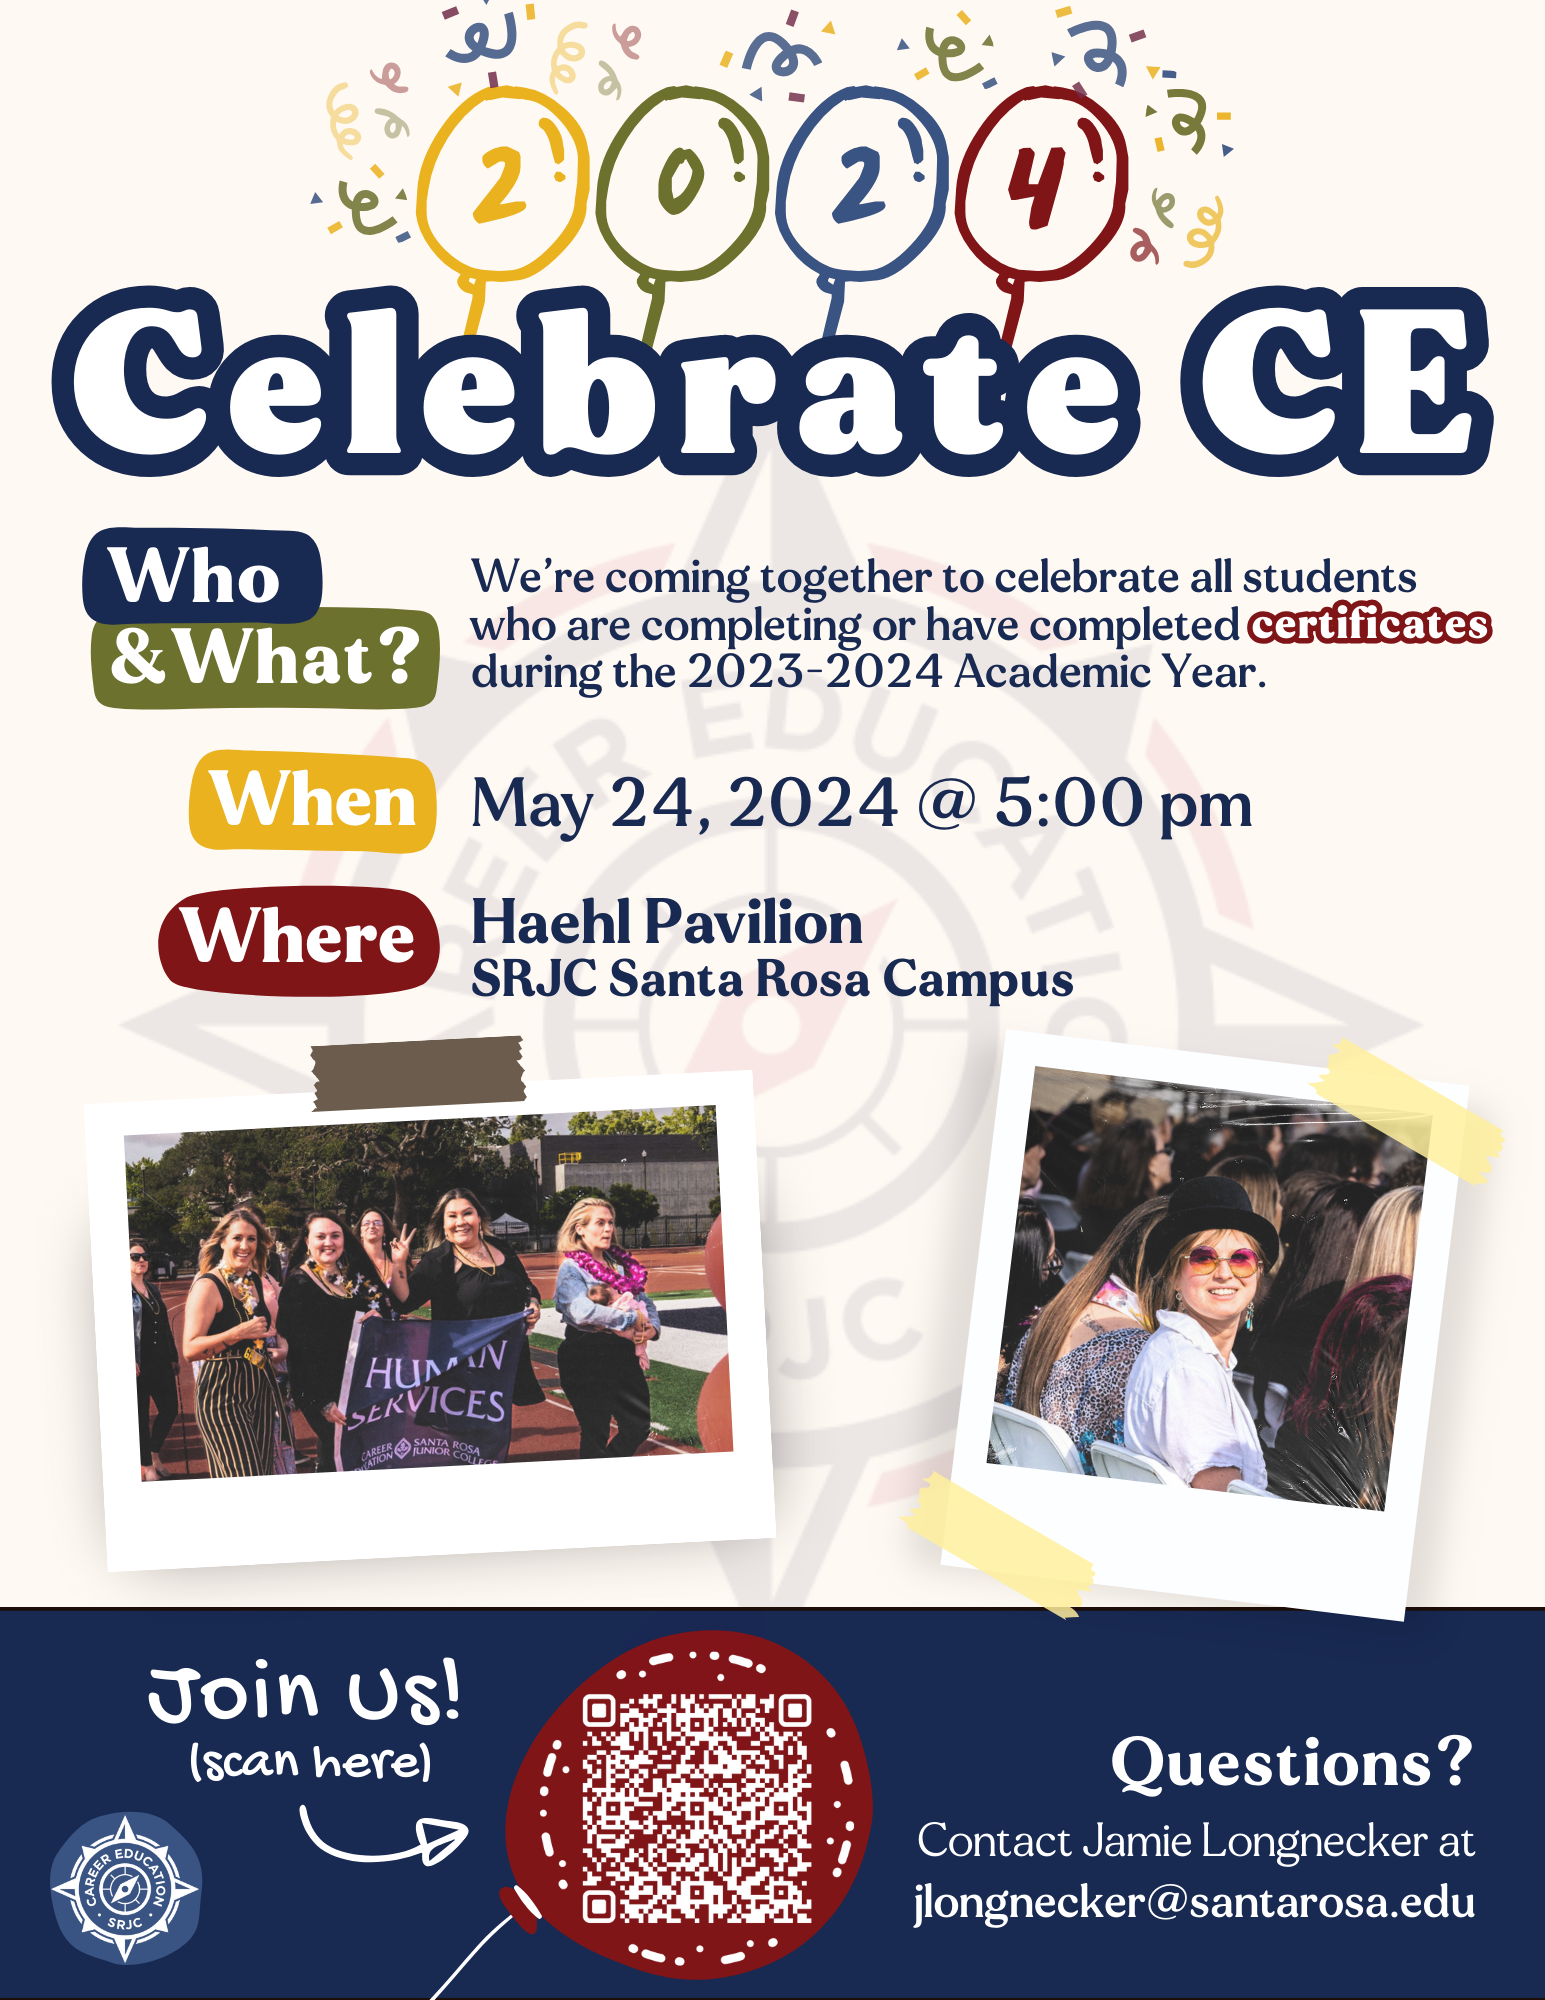 Celebrate CE 2024 WHO & WHAT: We're coming together to celebrate all students who are completing of have completed certificates during the 2023-2024 Academic Year. WHEN: May 24, 2024 @ 5:00pm WHERE: Haehl Pavilion, SRJC Santa Rosa Campus. QUESTIONS? Contact Jamie Longnecker at jlongnecker@santarosa.edu RSVP https://santarosajuniorcollege.formstack.com/forms/celebrate_ce_2024_student_rsvp_final